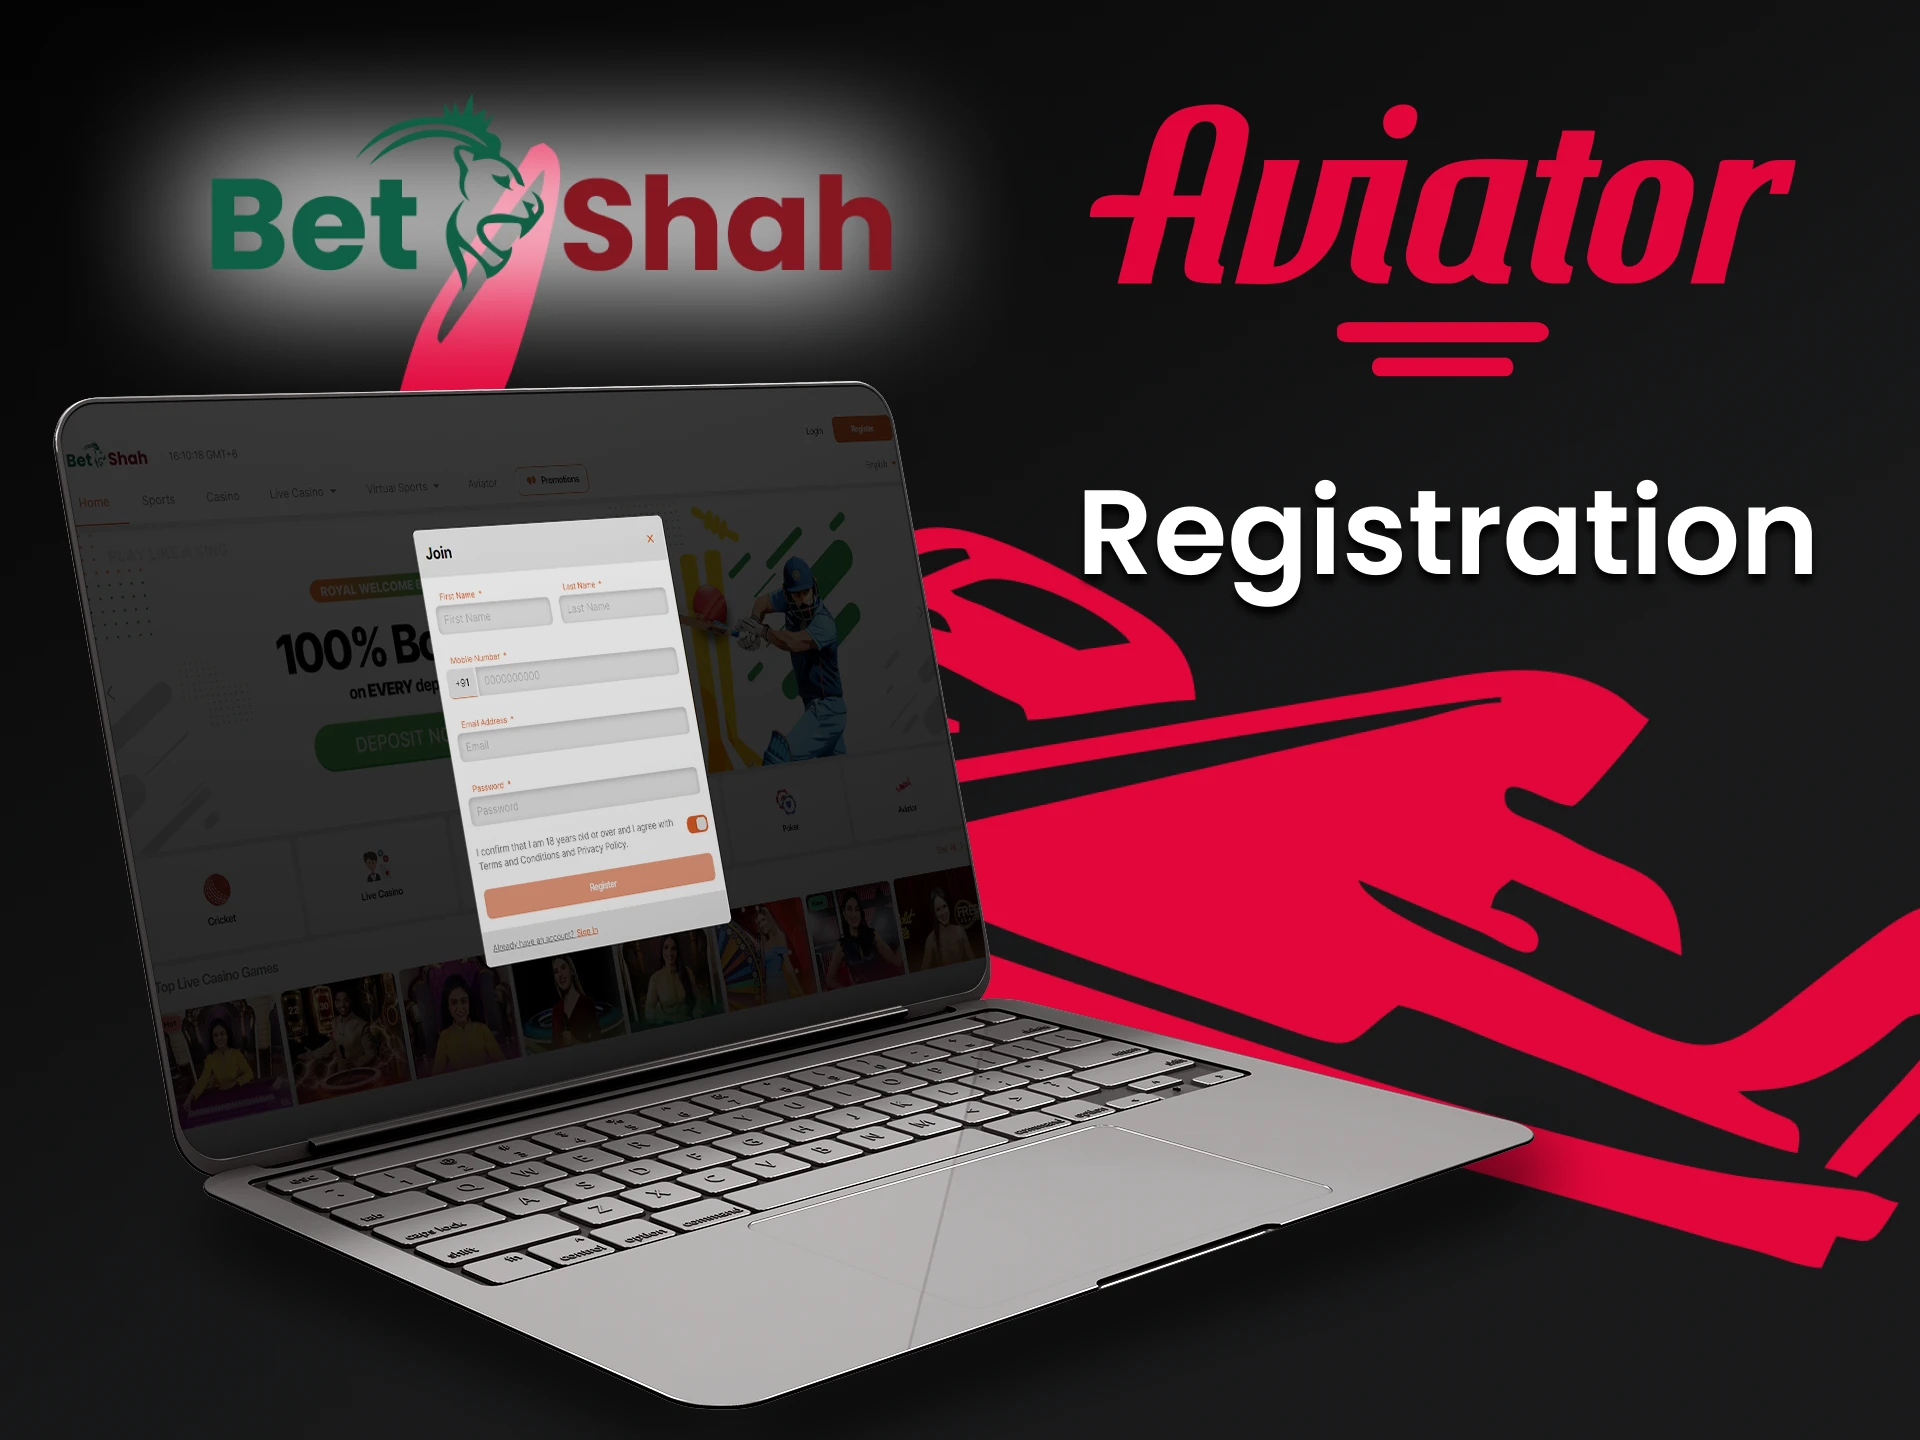 Create a personal account on BetShah to play Aviator.